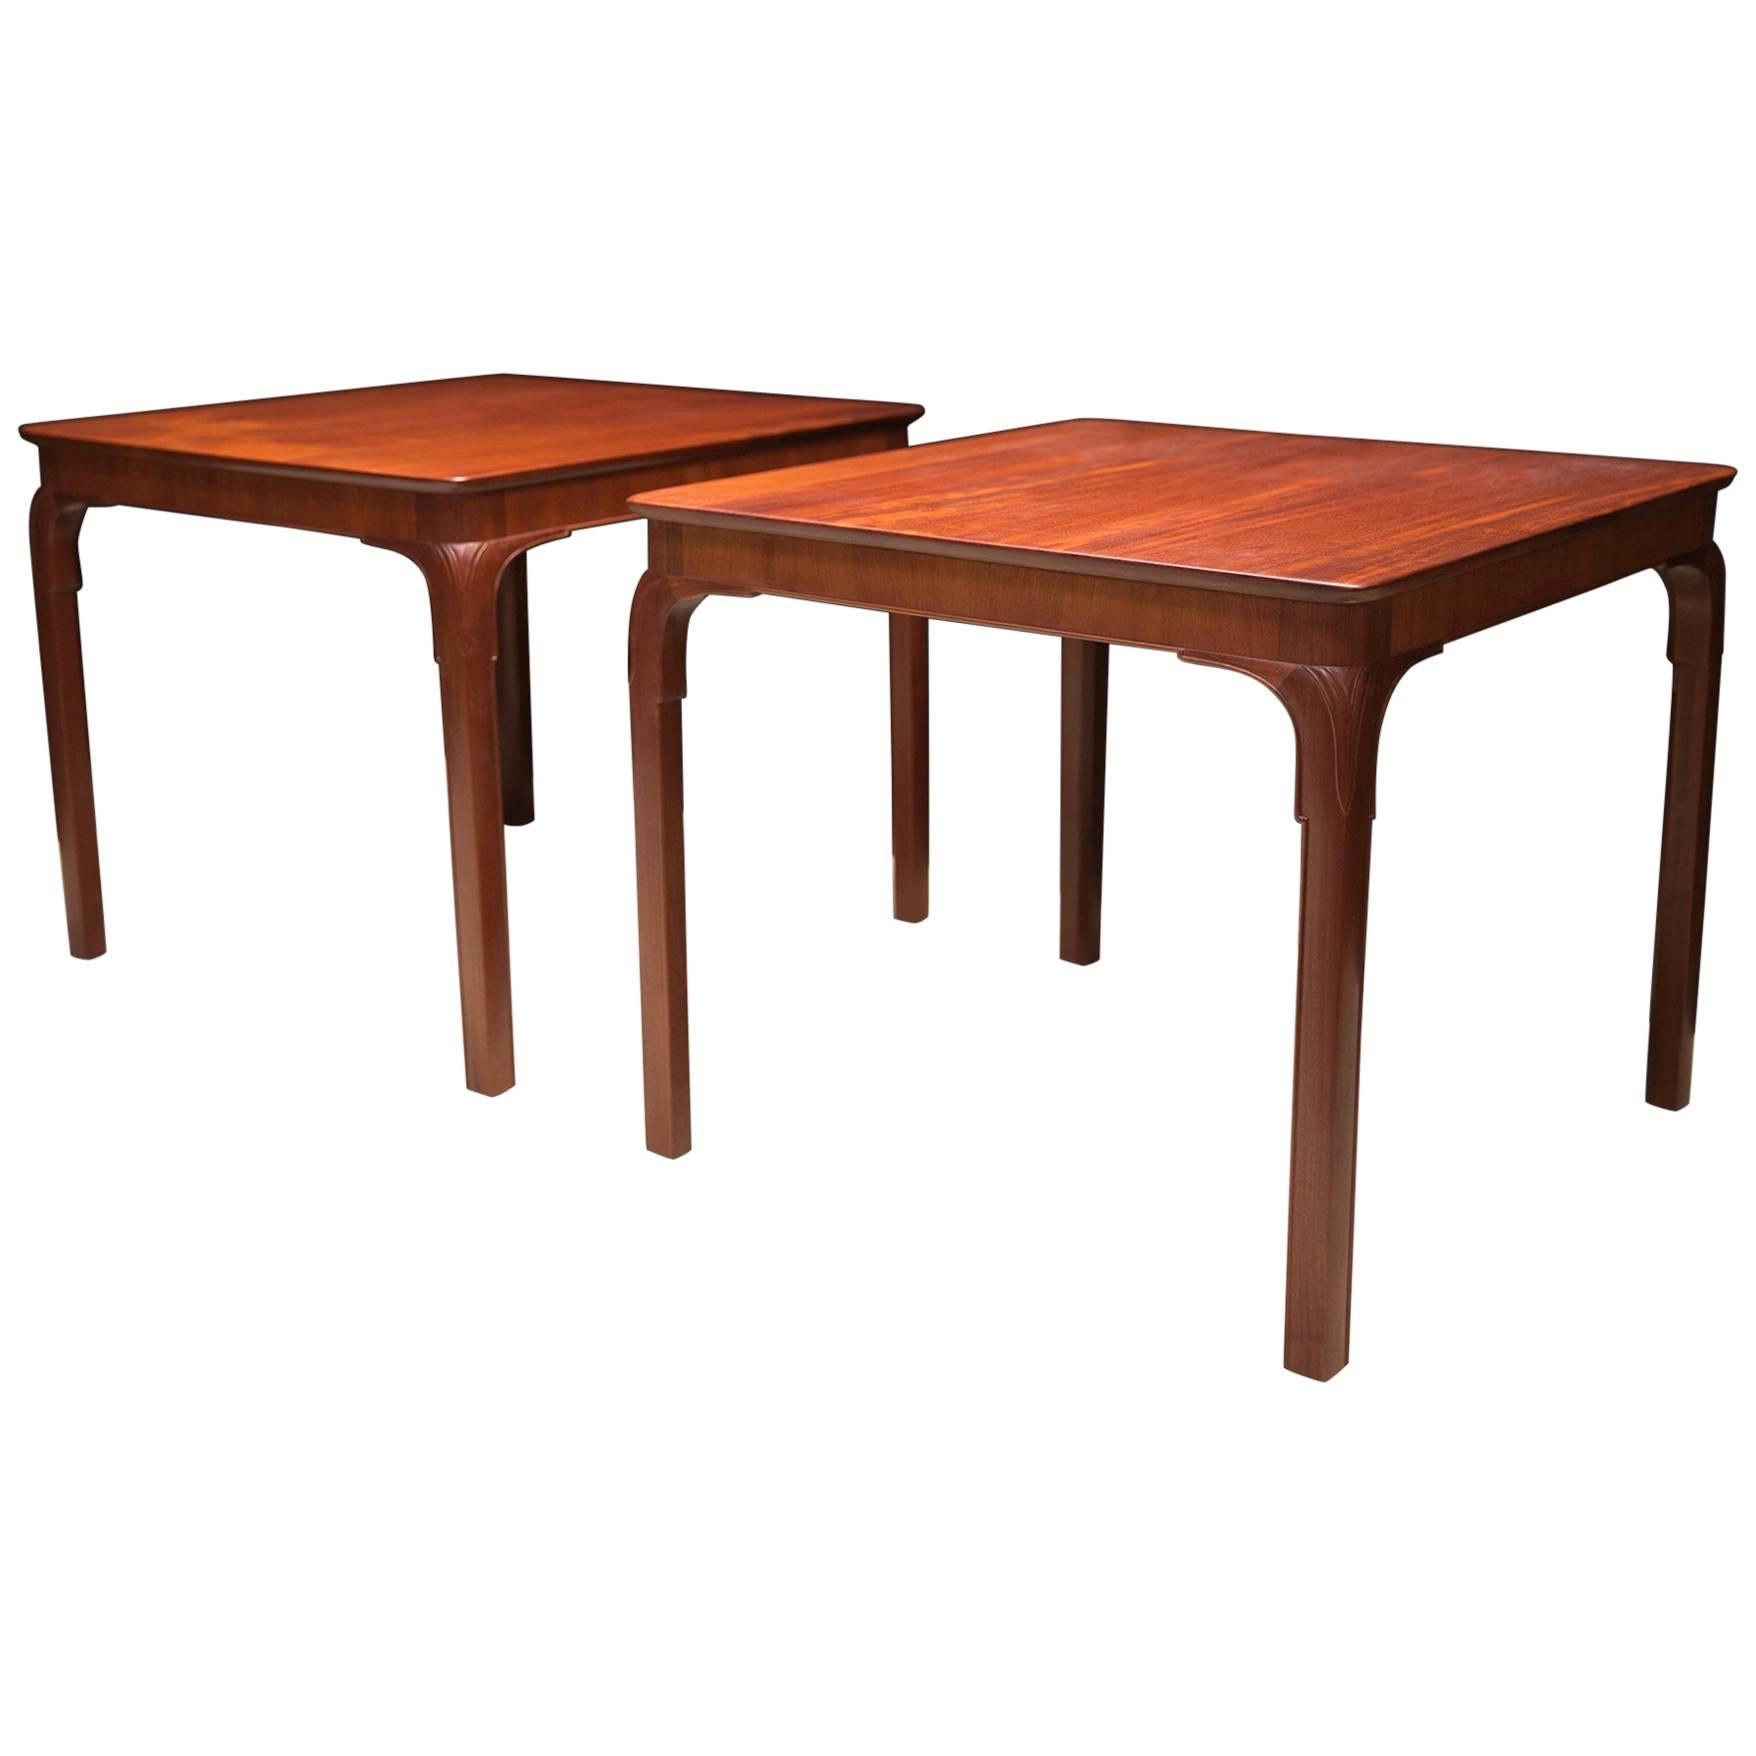 Frits Henningsen's Monumental Side Tables, Solid Cuban Mahogany and Carved Legs For Sale